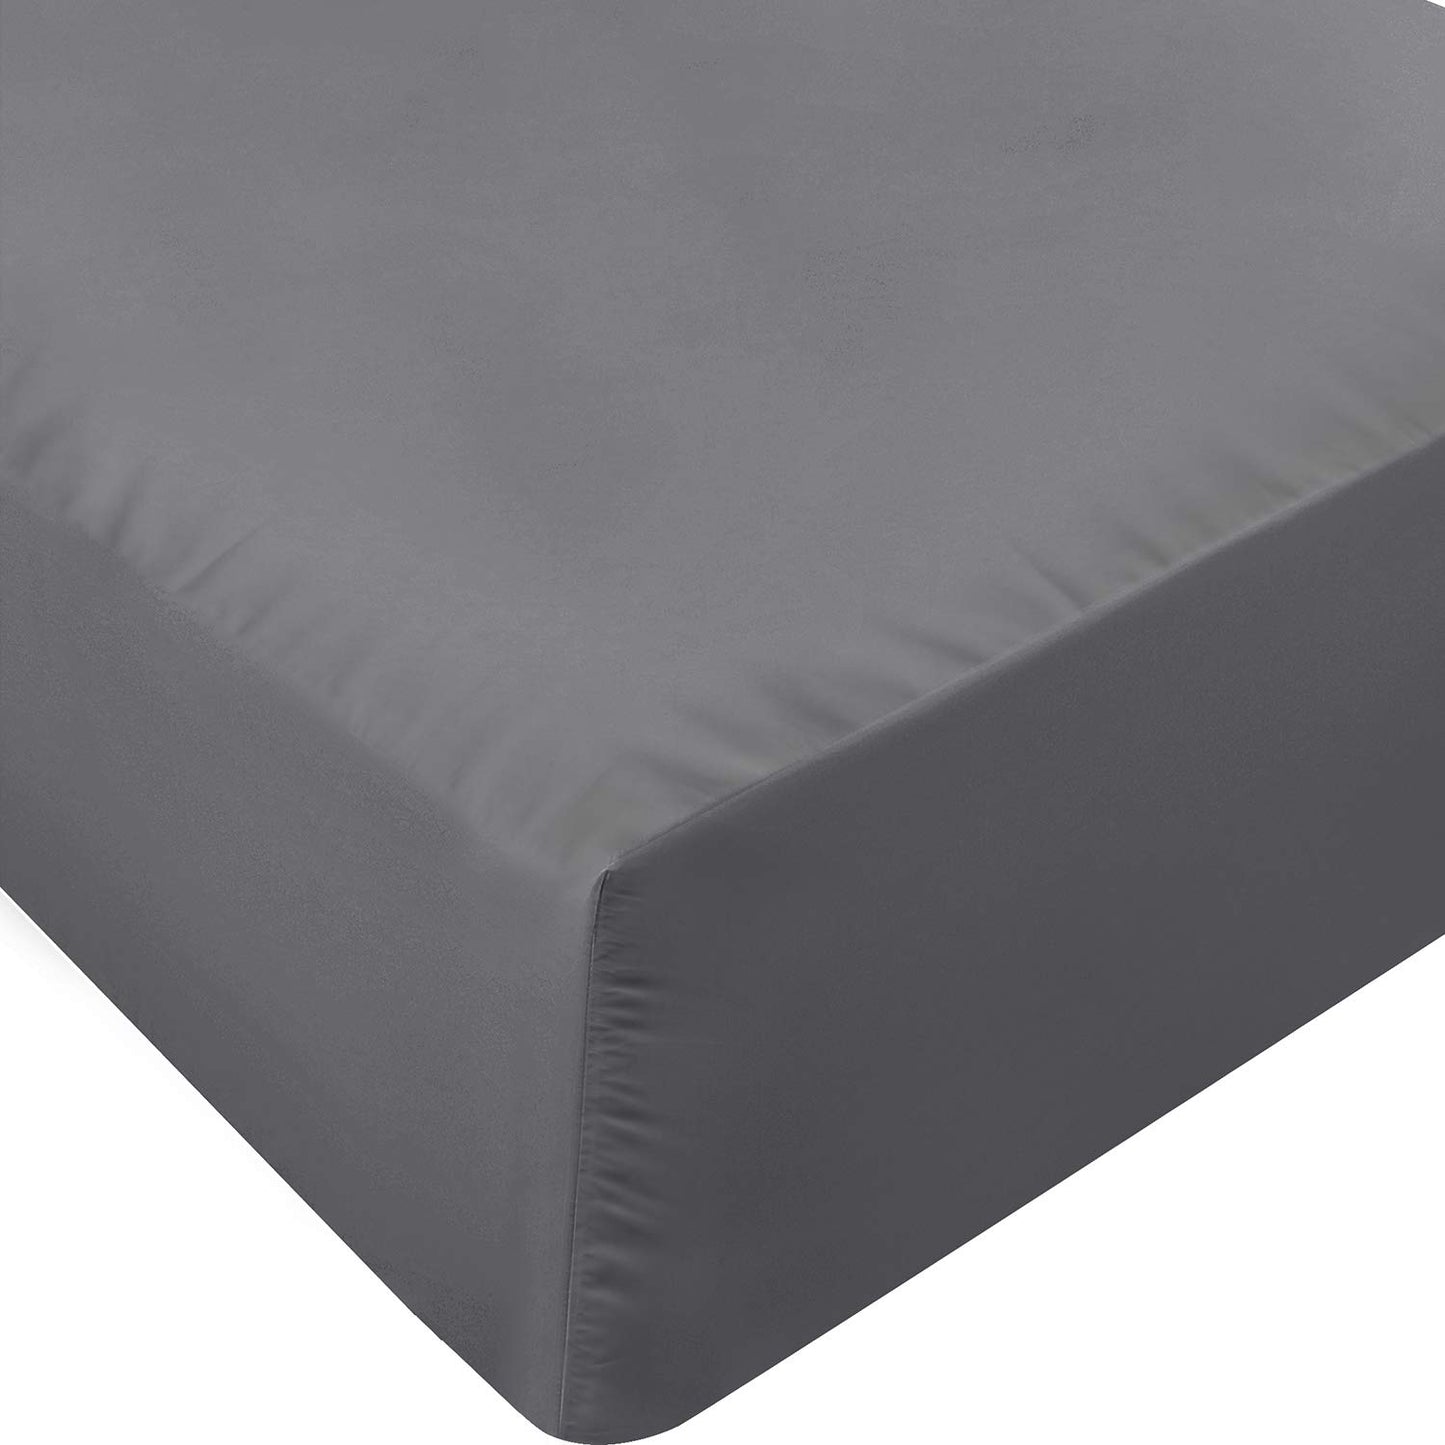 Utopia Bedding Cal King Fitted Sheet - Bottom Sheet - Deep Pocket - Soft Microfiber -Shrinkage and Fade Resistant-Easy Care -1 Fitted Sheet Only (Grey)